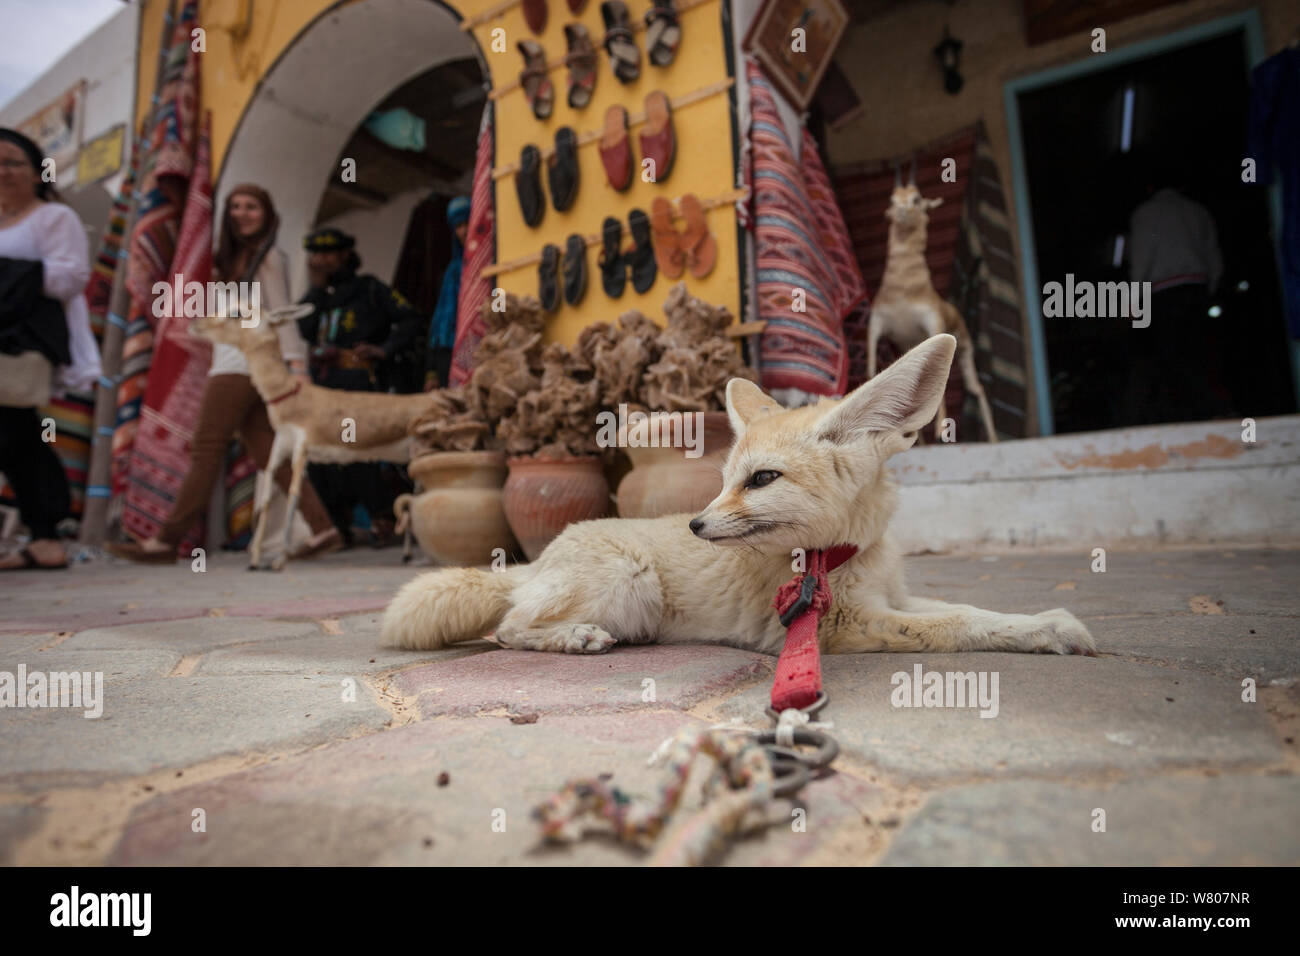 Fennec fox (Vulpes zerda) ‘Sultan’ tied up in front of a tourist shop in the souk,  Douz,  Kebili Governorate. Tunisia. Unwittingly, tourists support the capture of fennec fox cubs from the wild by paying to take photos or even purchasing them, illegally, as pets. Foxes used as tourist attractions often exhibit signs of stress and aggression and die prematurely. April 2013. Stock Photo